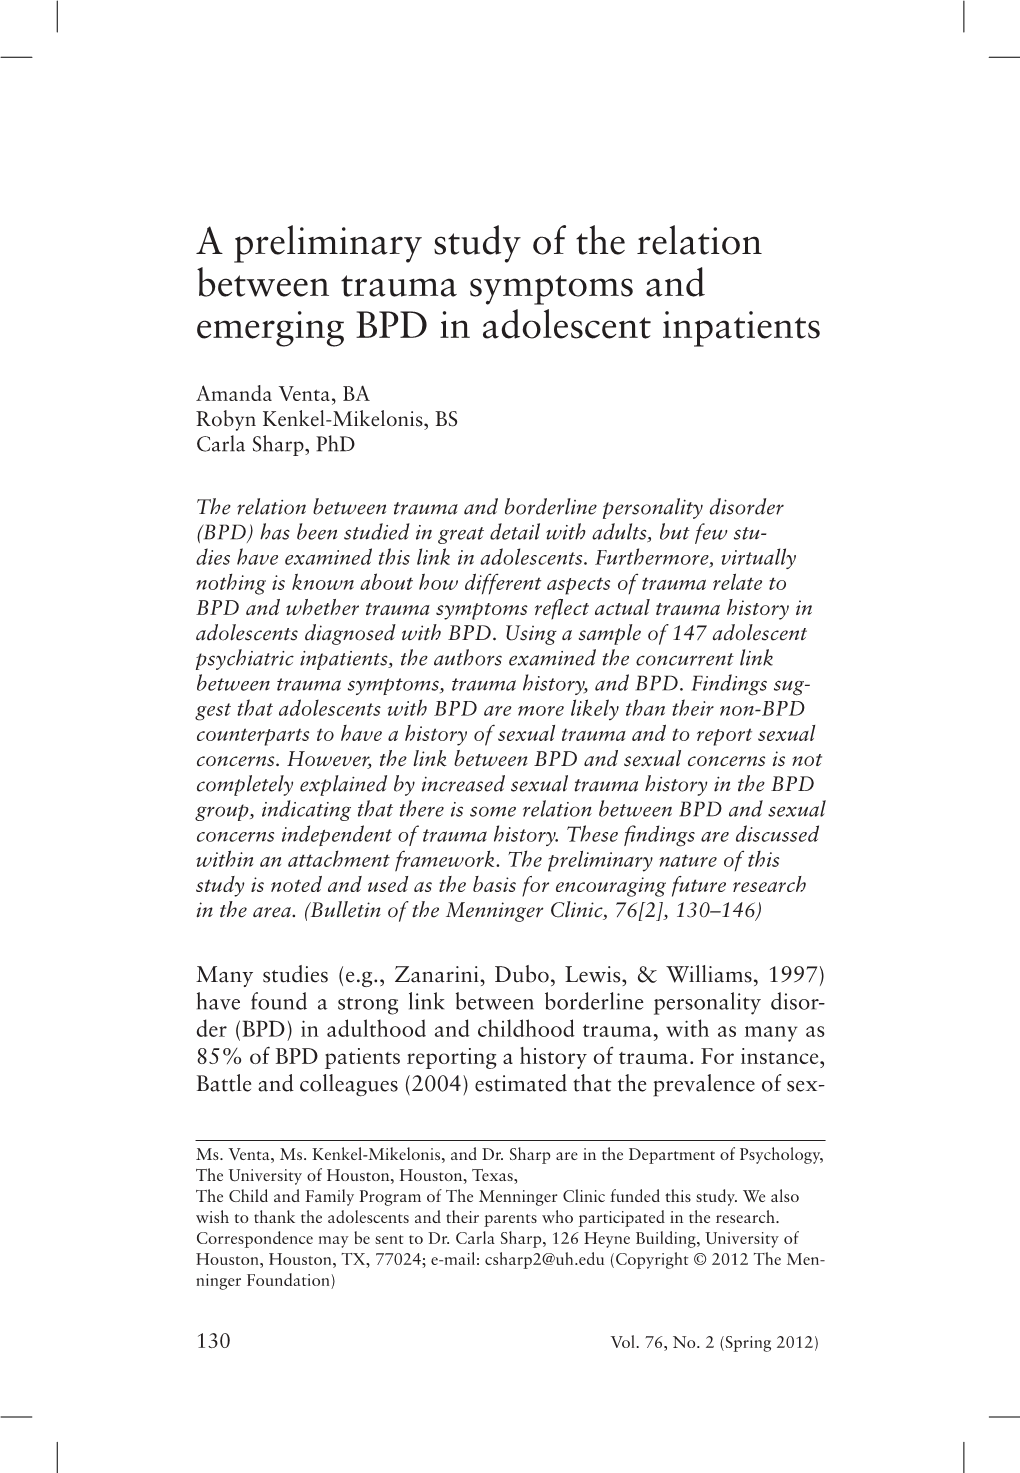 A Preliminary Study of the Relation Between Trauma Symptoms and Emerging BPD in Adolescent Inpatients